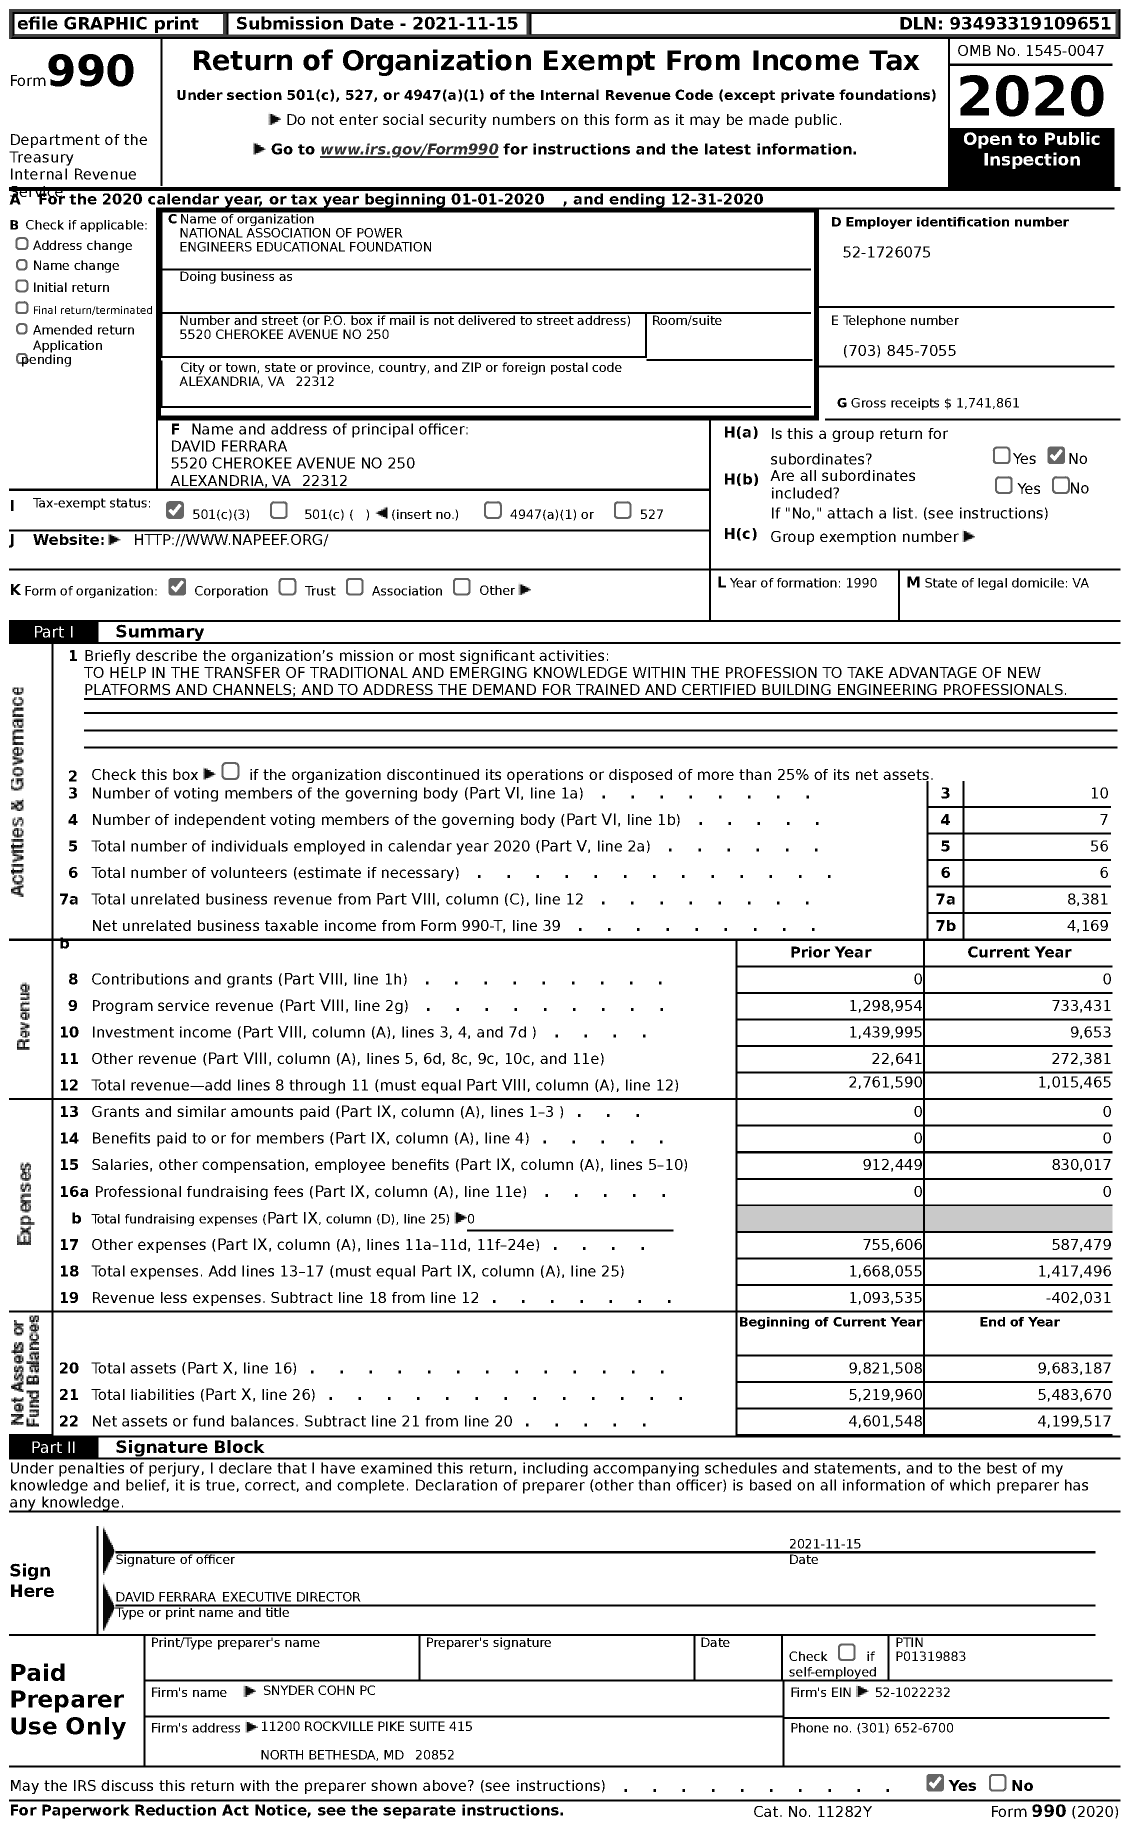 Image of first page of 2020 Form 990 for National Association of Power Engineers Educational Foundation